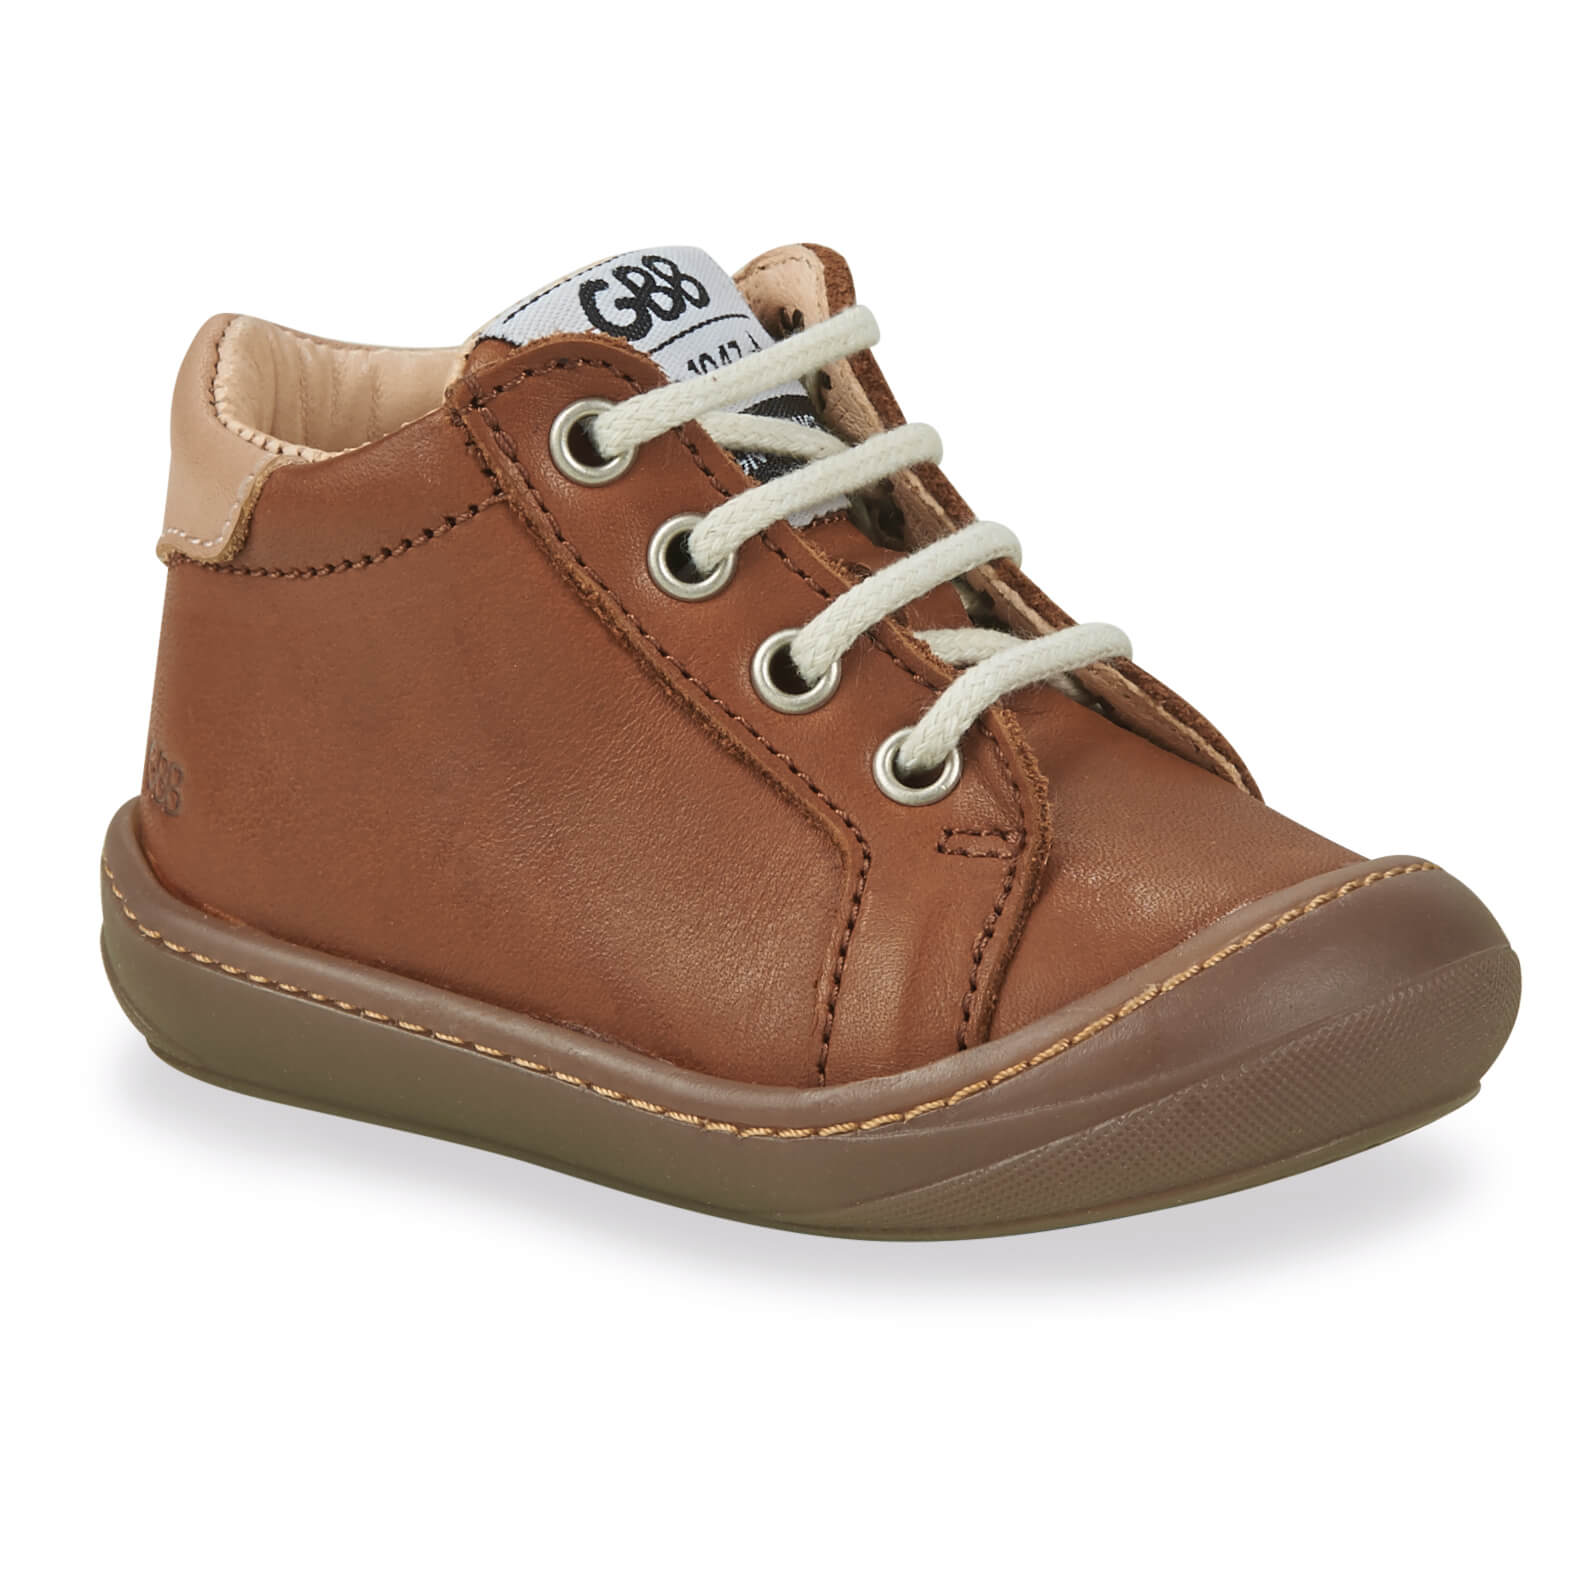 GBB Bottines Bambino ma petite pointure #couleur_camel